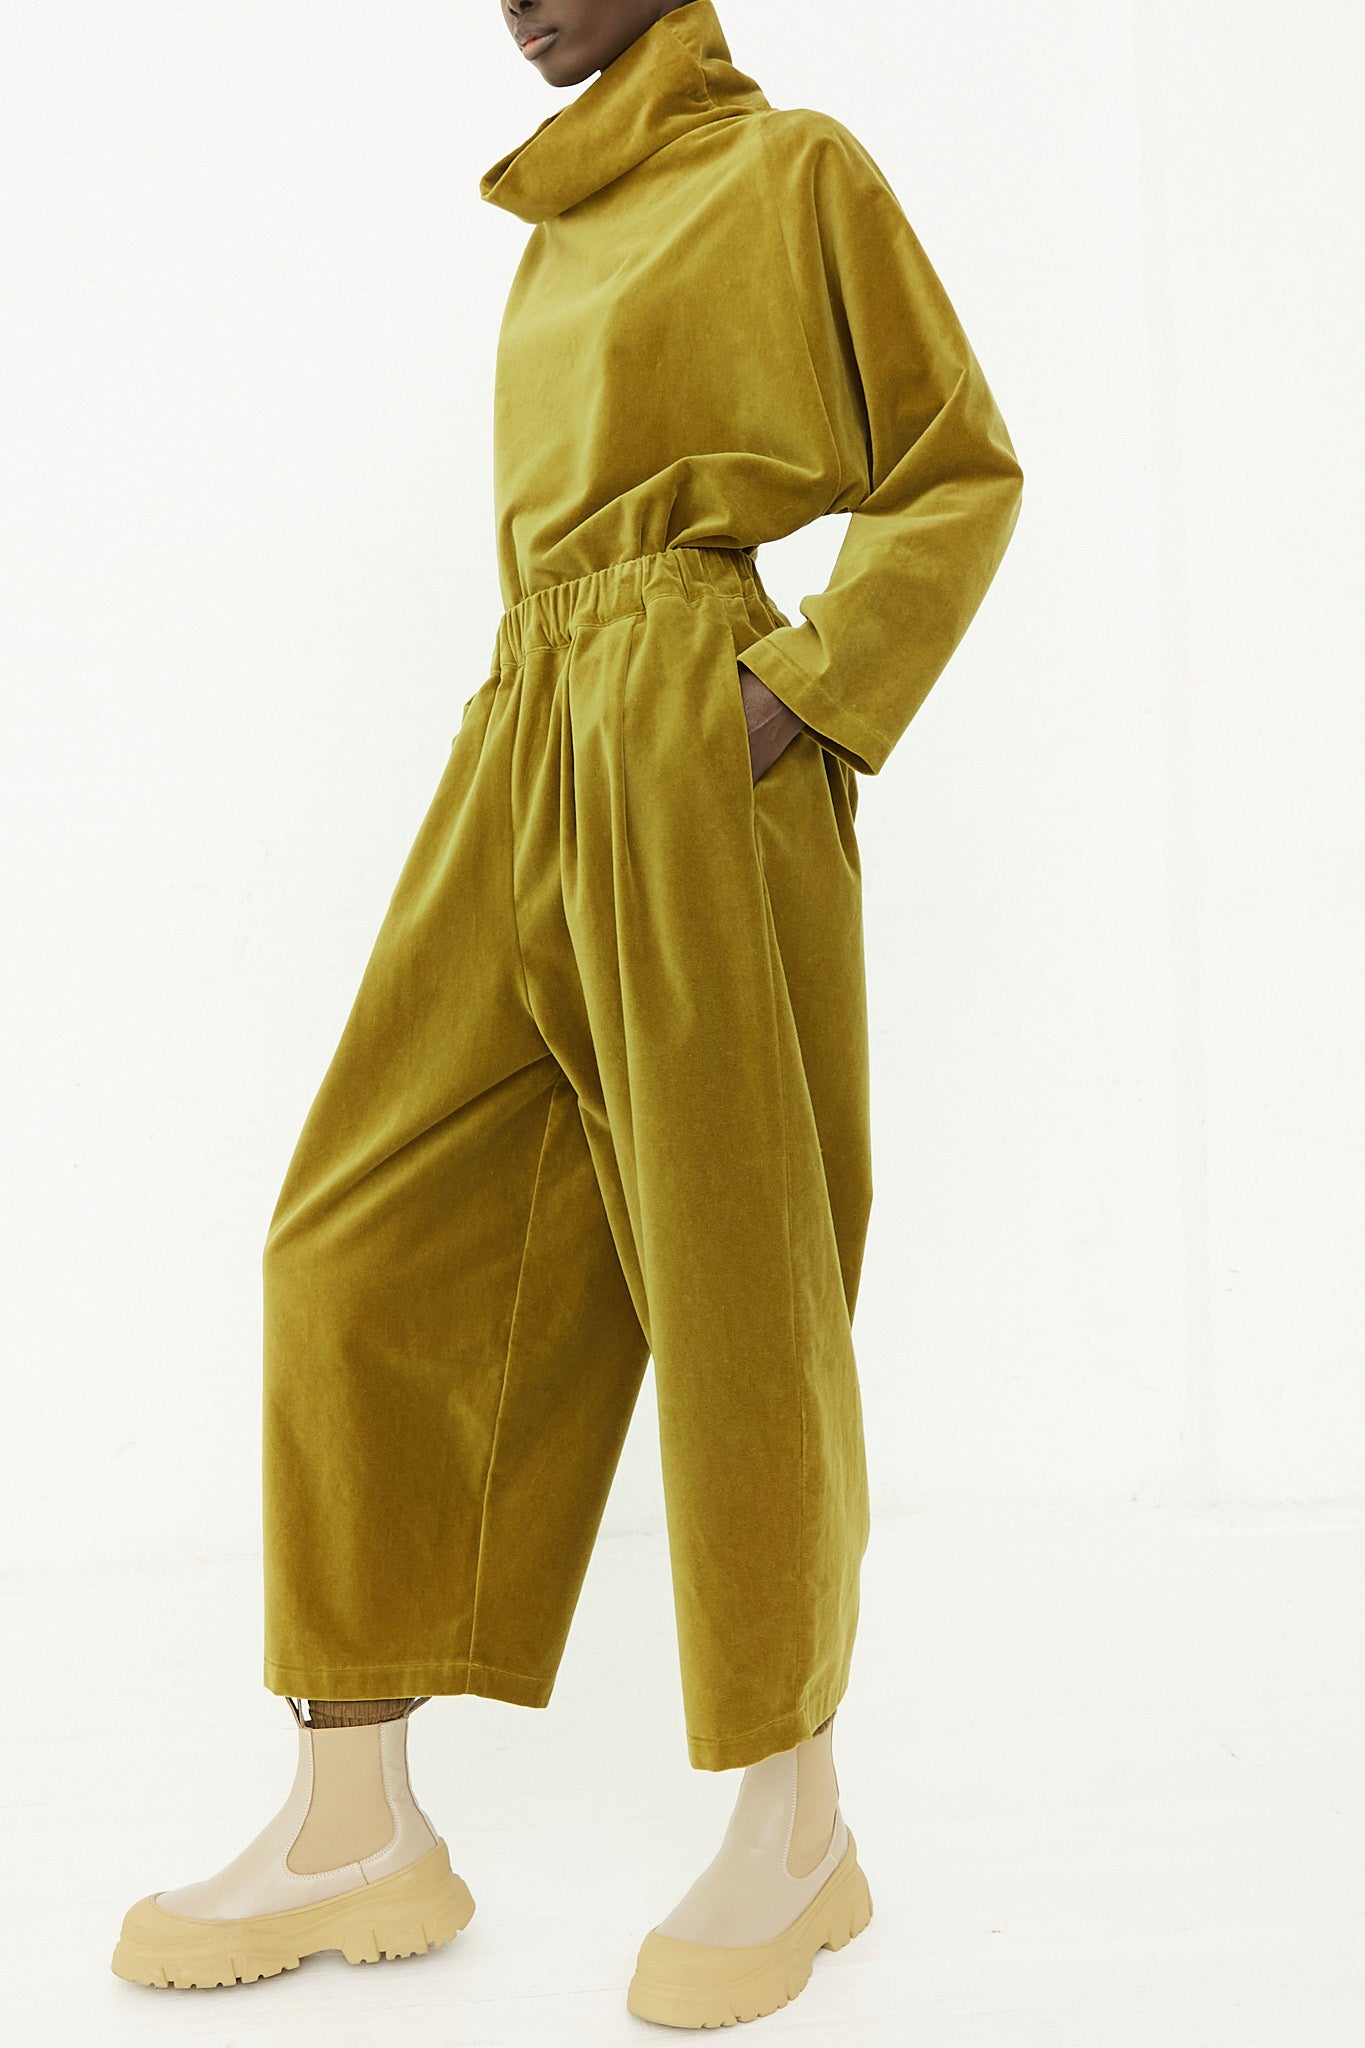 A woman wearing a yellow jumpsuit with an elasticated waist and wide leg pant design.